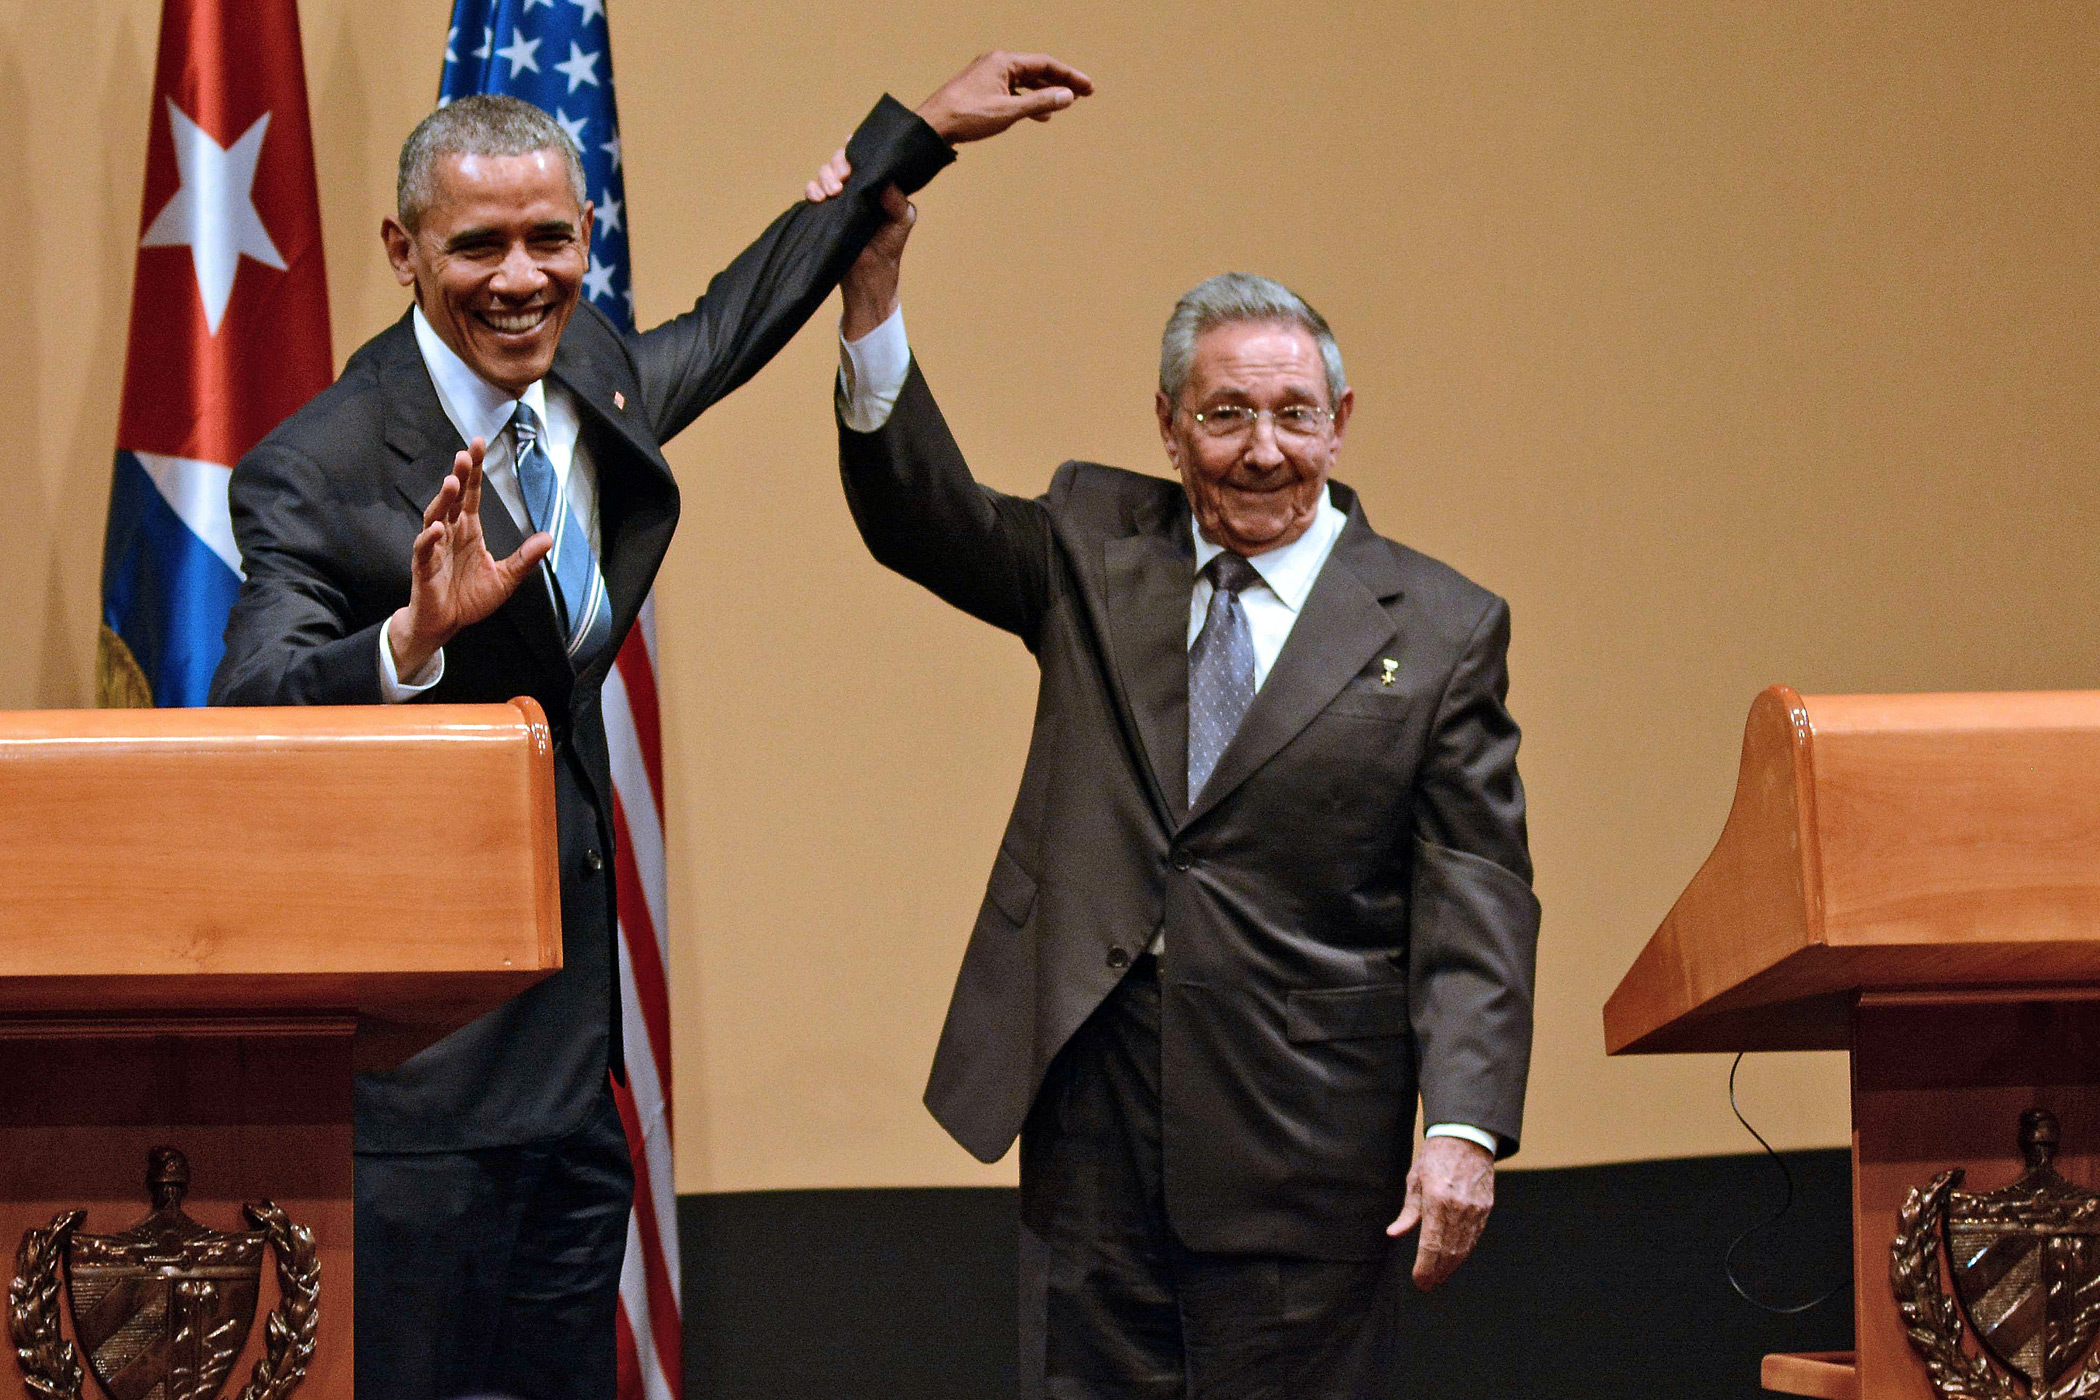 Cuban President Raul Castro, right, raises the hand of U.S. President Barack Obama during a joint press conference at the Revolution Palace in Havana on March 21, 2016.